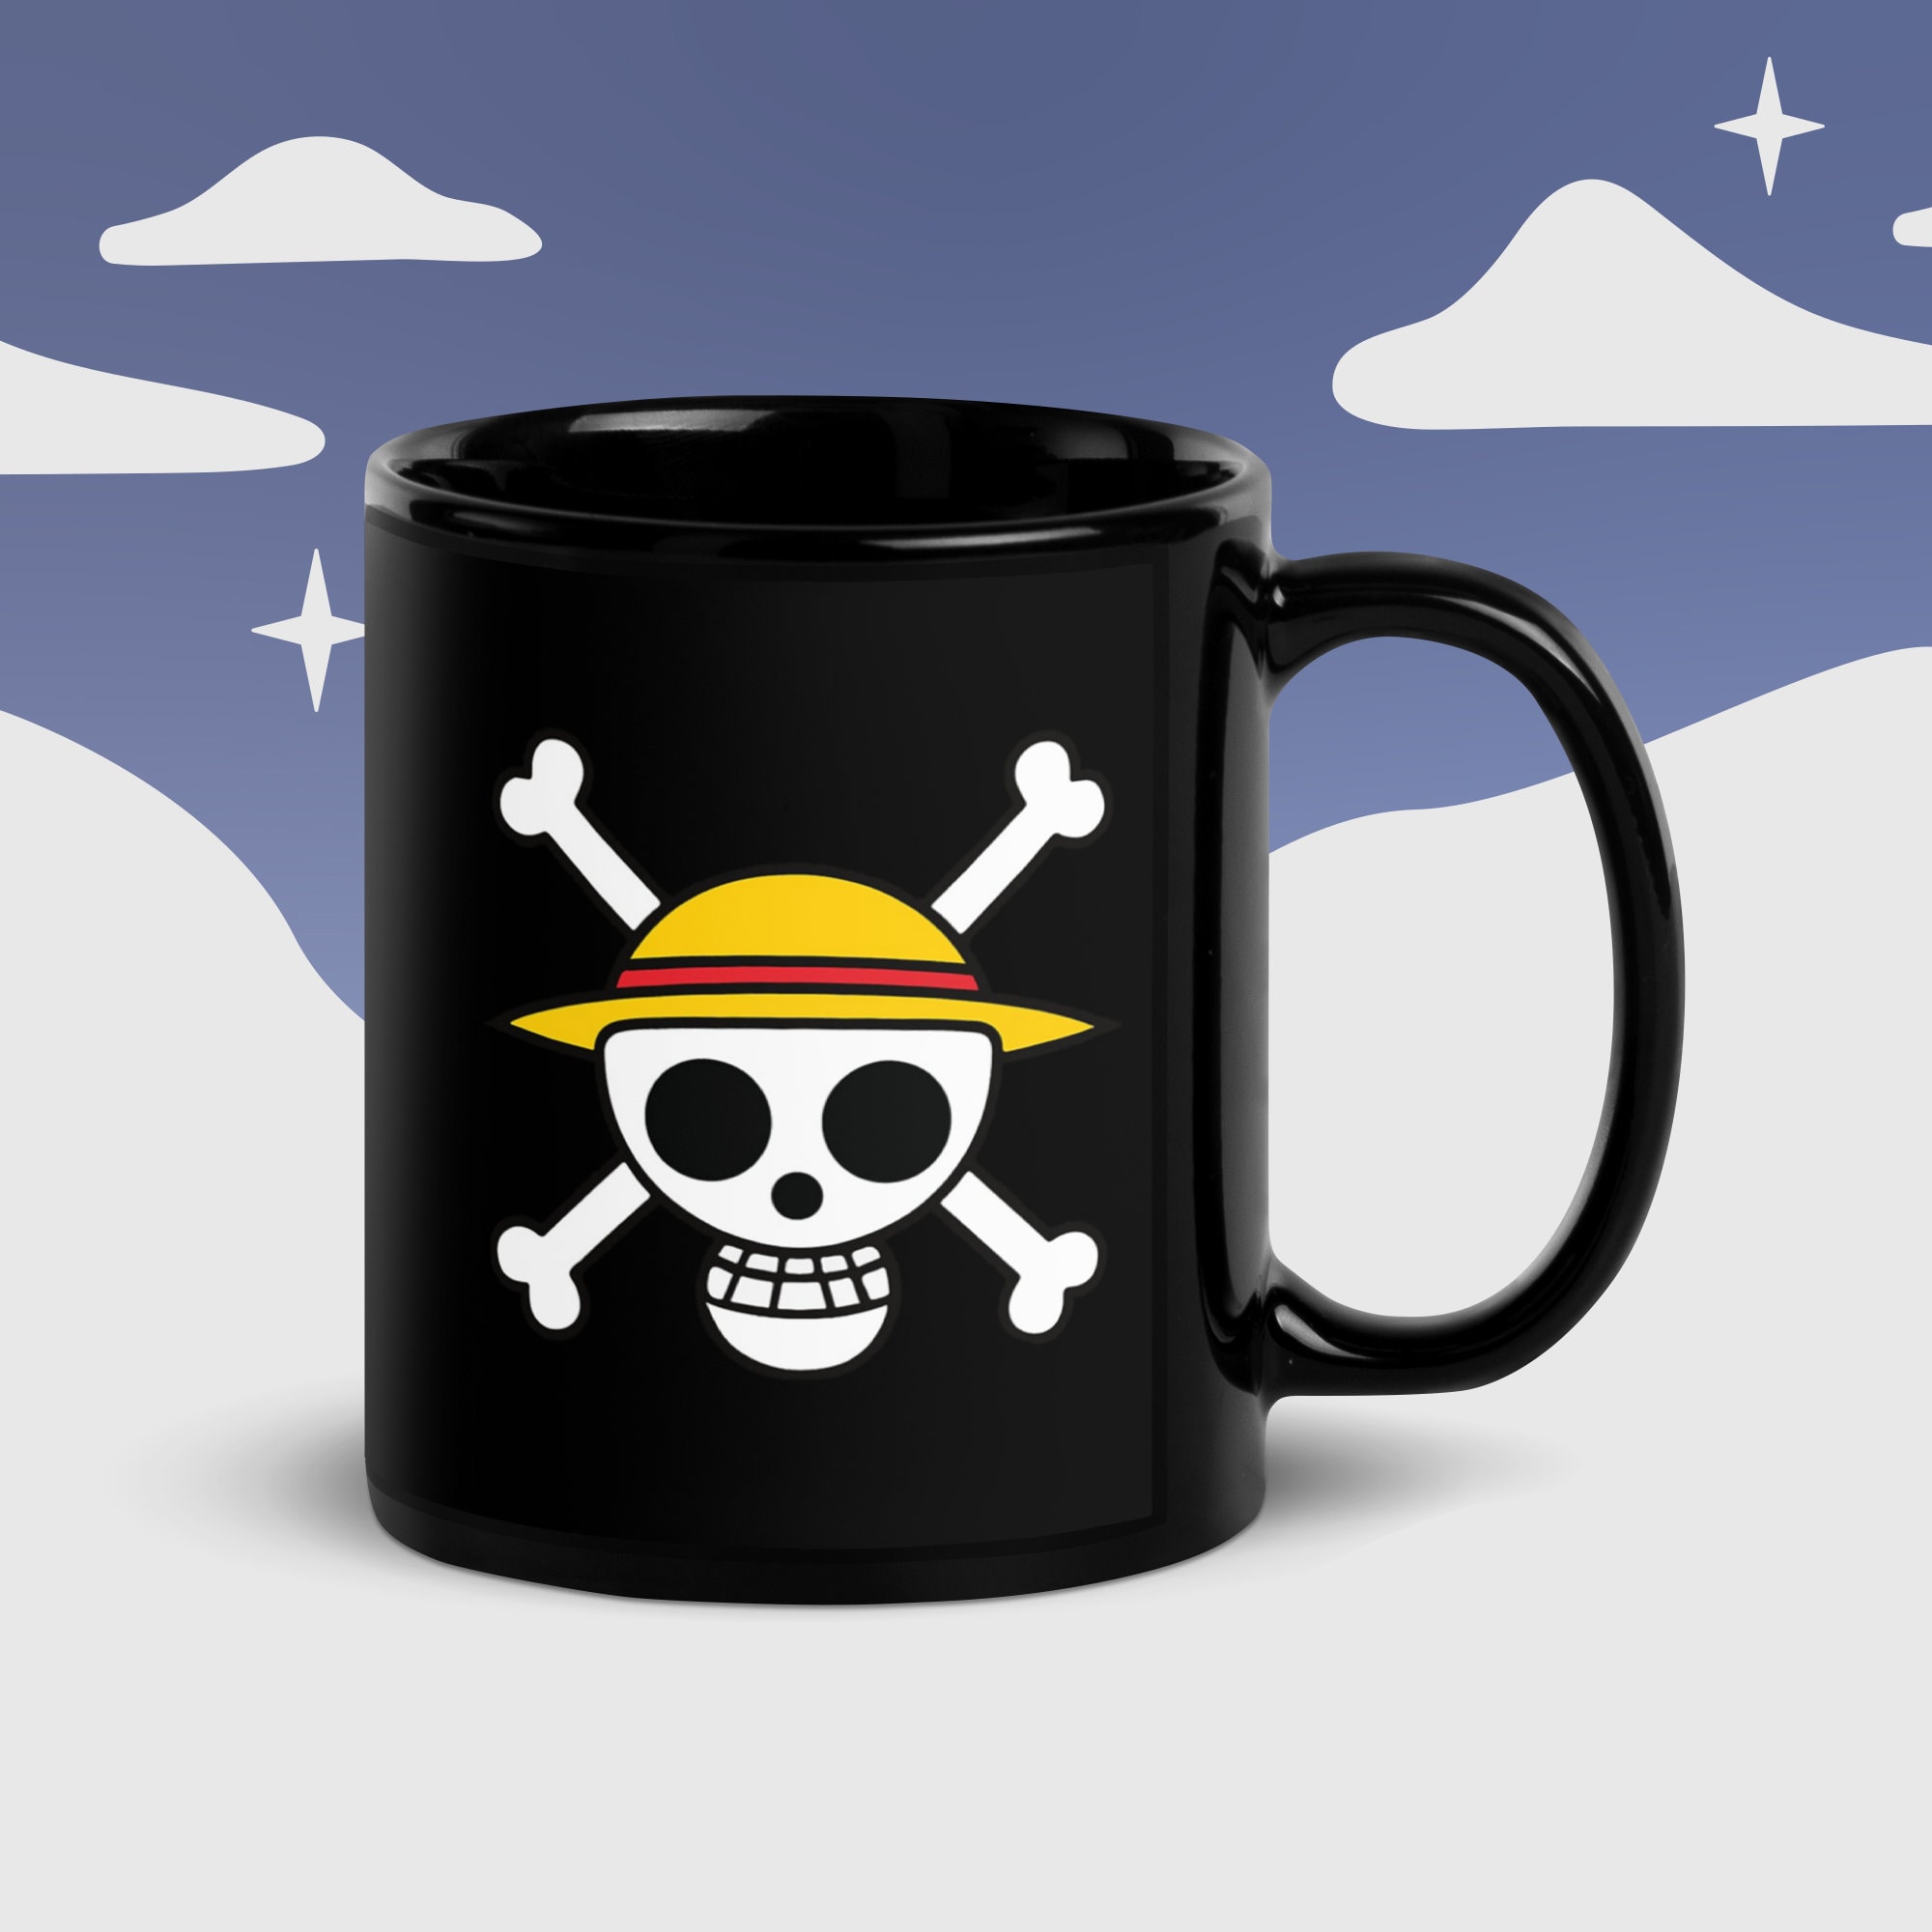 One Piece: Luffy the King of the Pirates Mug